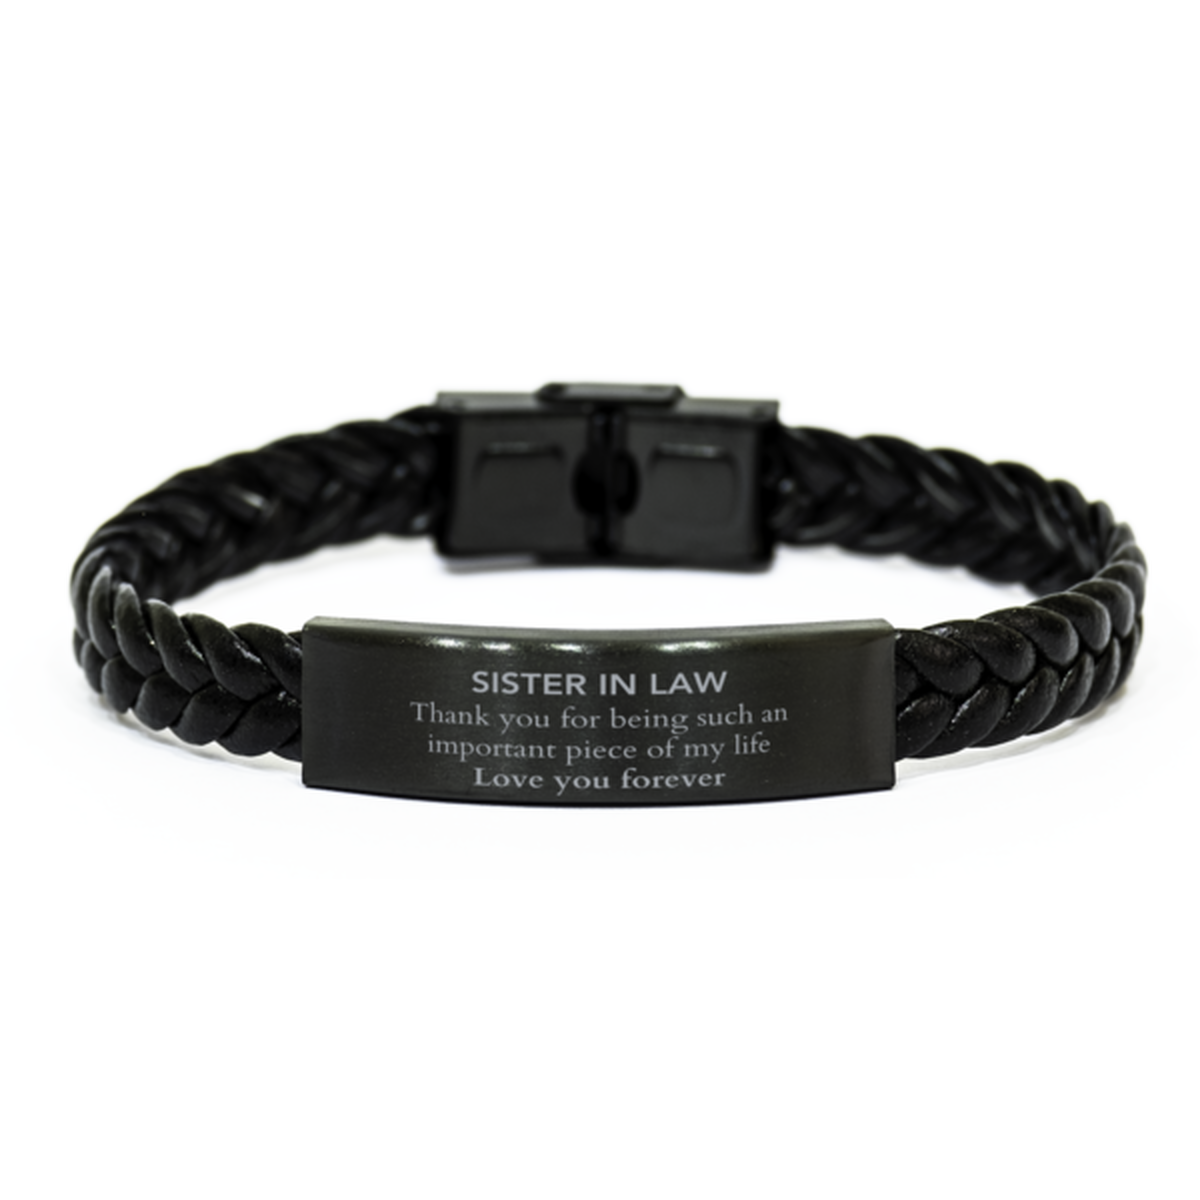 Appropriate Sister In Law Braided Leather Bracelet Epic Birthday Gifts for Sister In Law Thank you for being such an important piece of my life Sister In Law Christmas Mothers Fathers Day